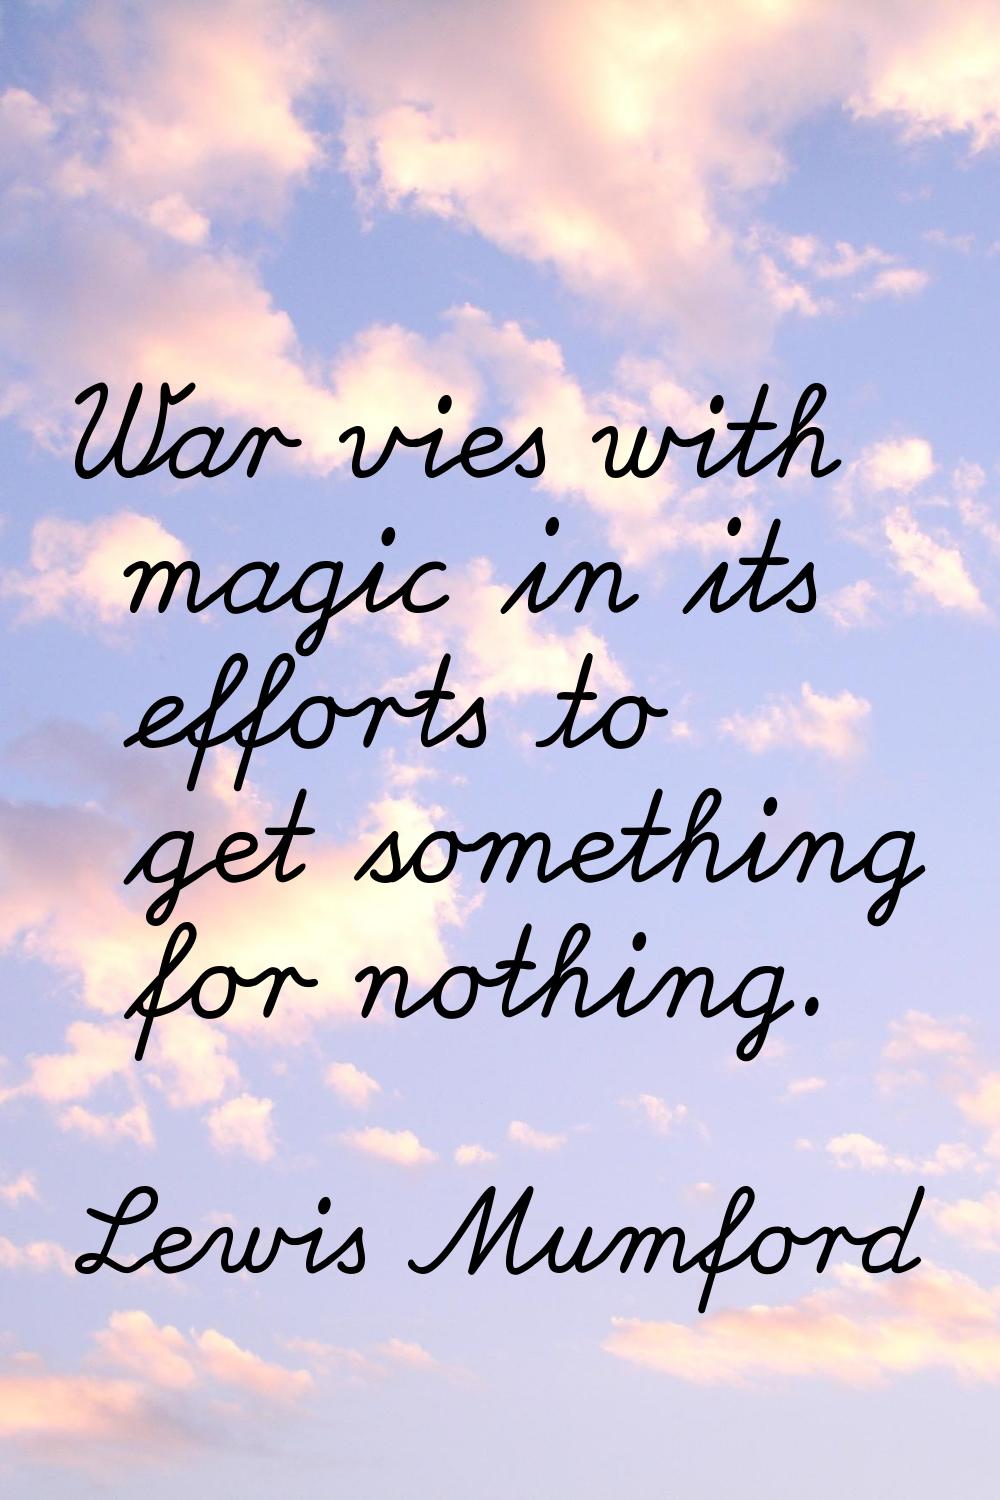 War vies with magic in its efforts to get something for nothing.